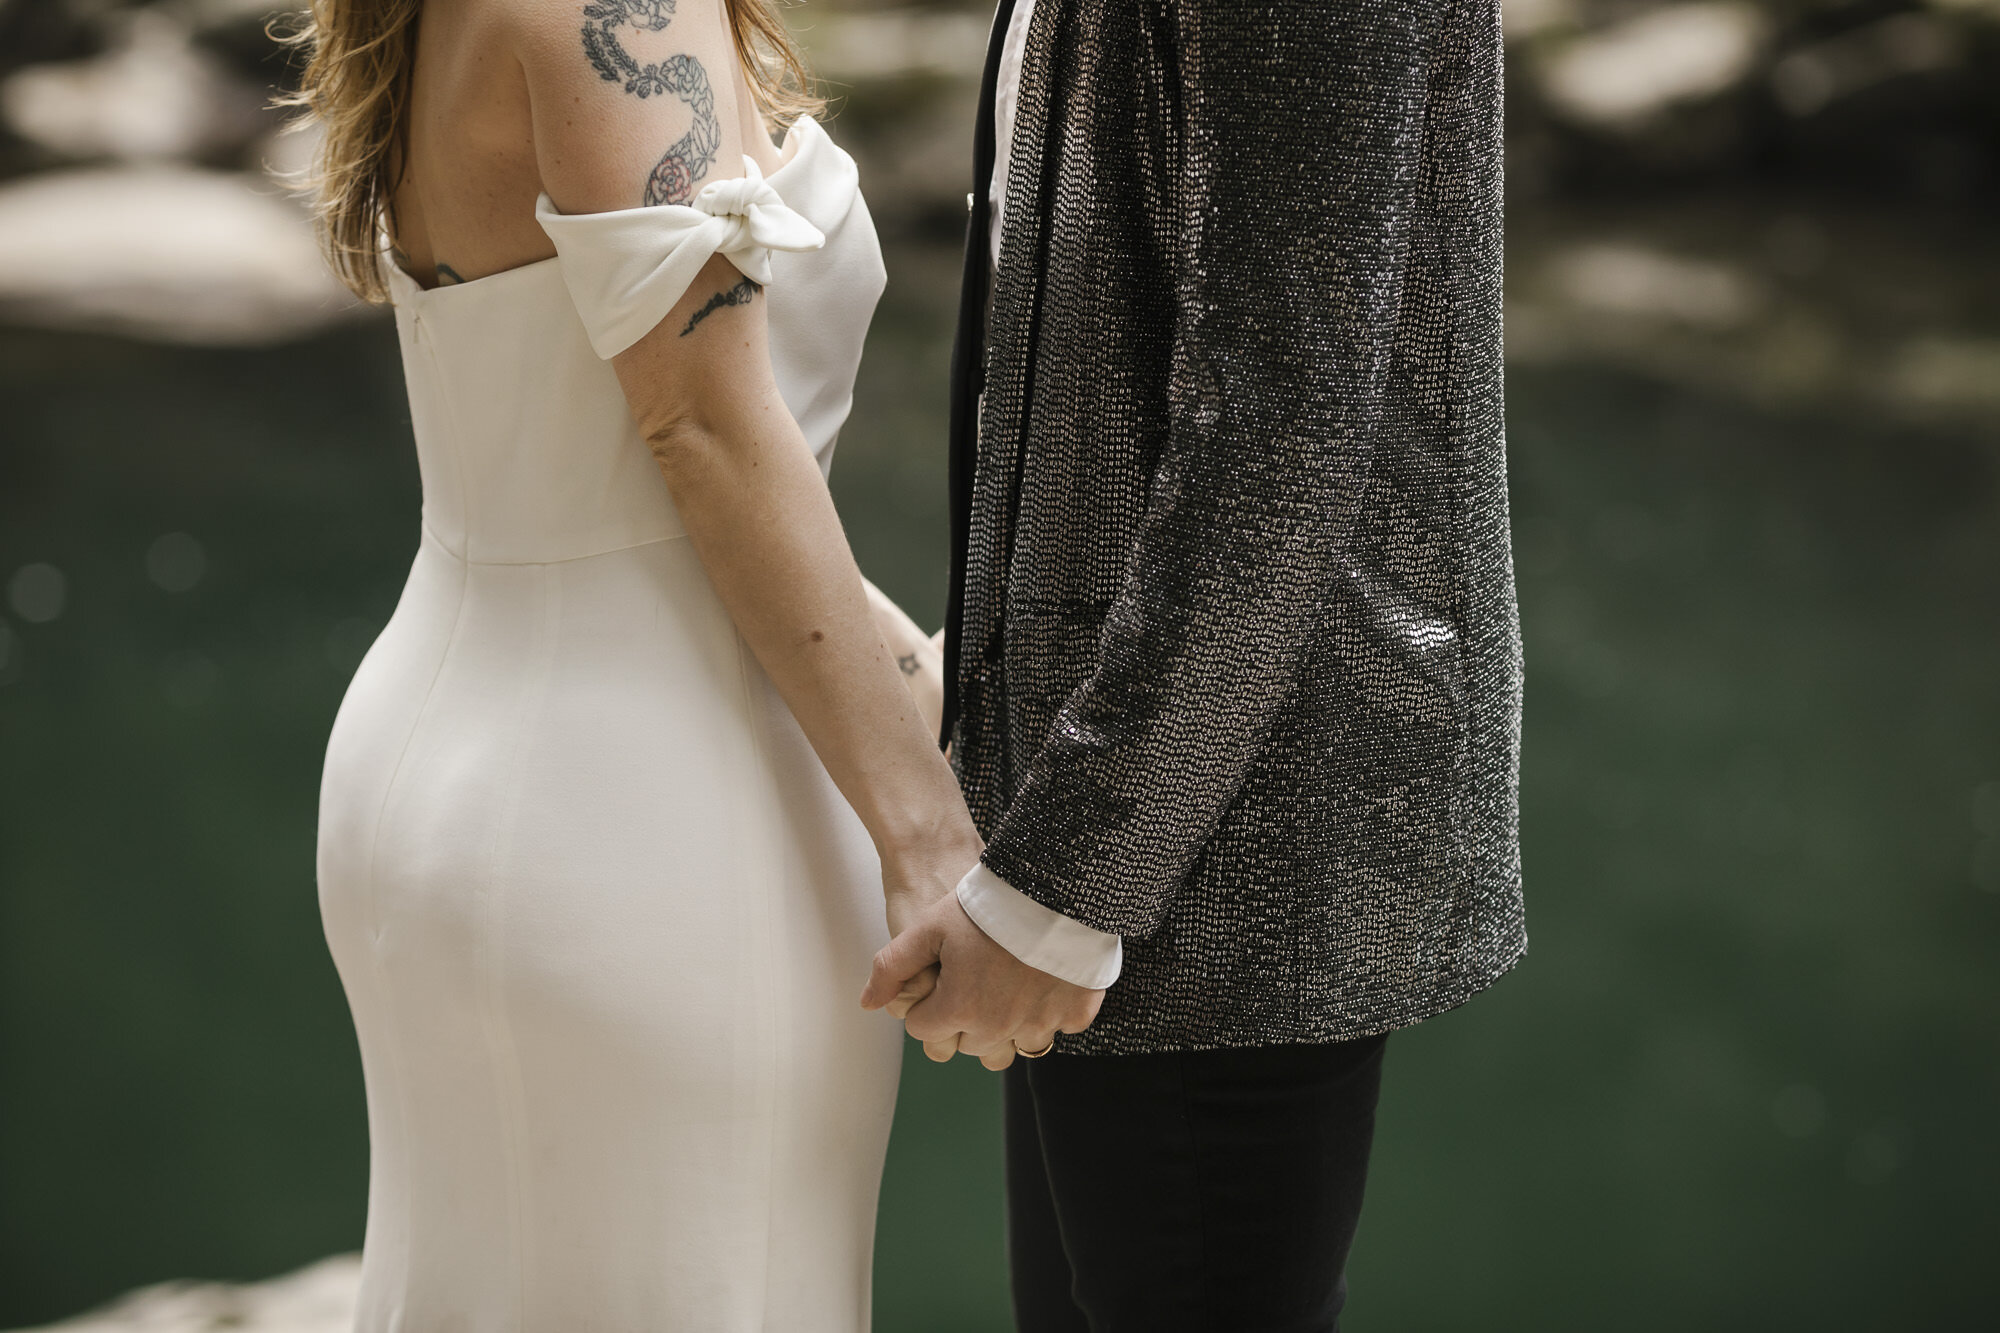 Bride with tattoos and strapless dress holds hands with her partner on their wedding day in Washington